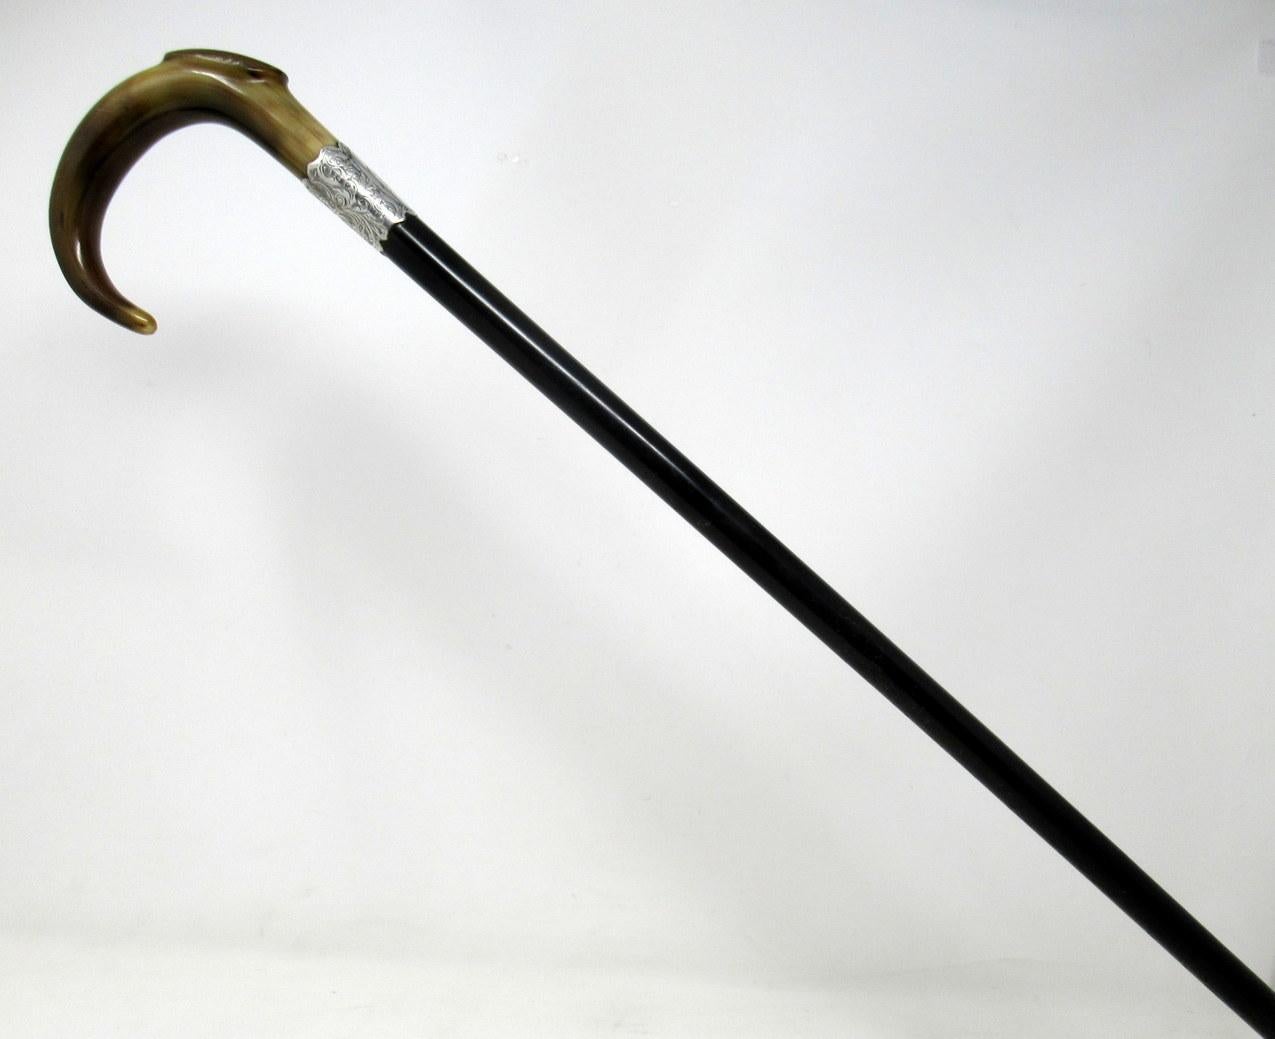 Embossed Ebonized Wood Walking Stick Cane Horn Crook Handle Sterling Silver Collar, 1912